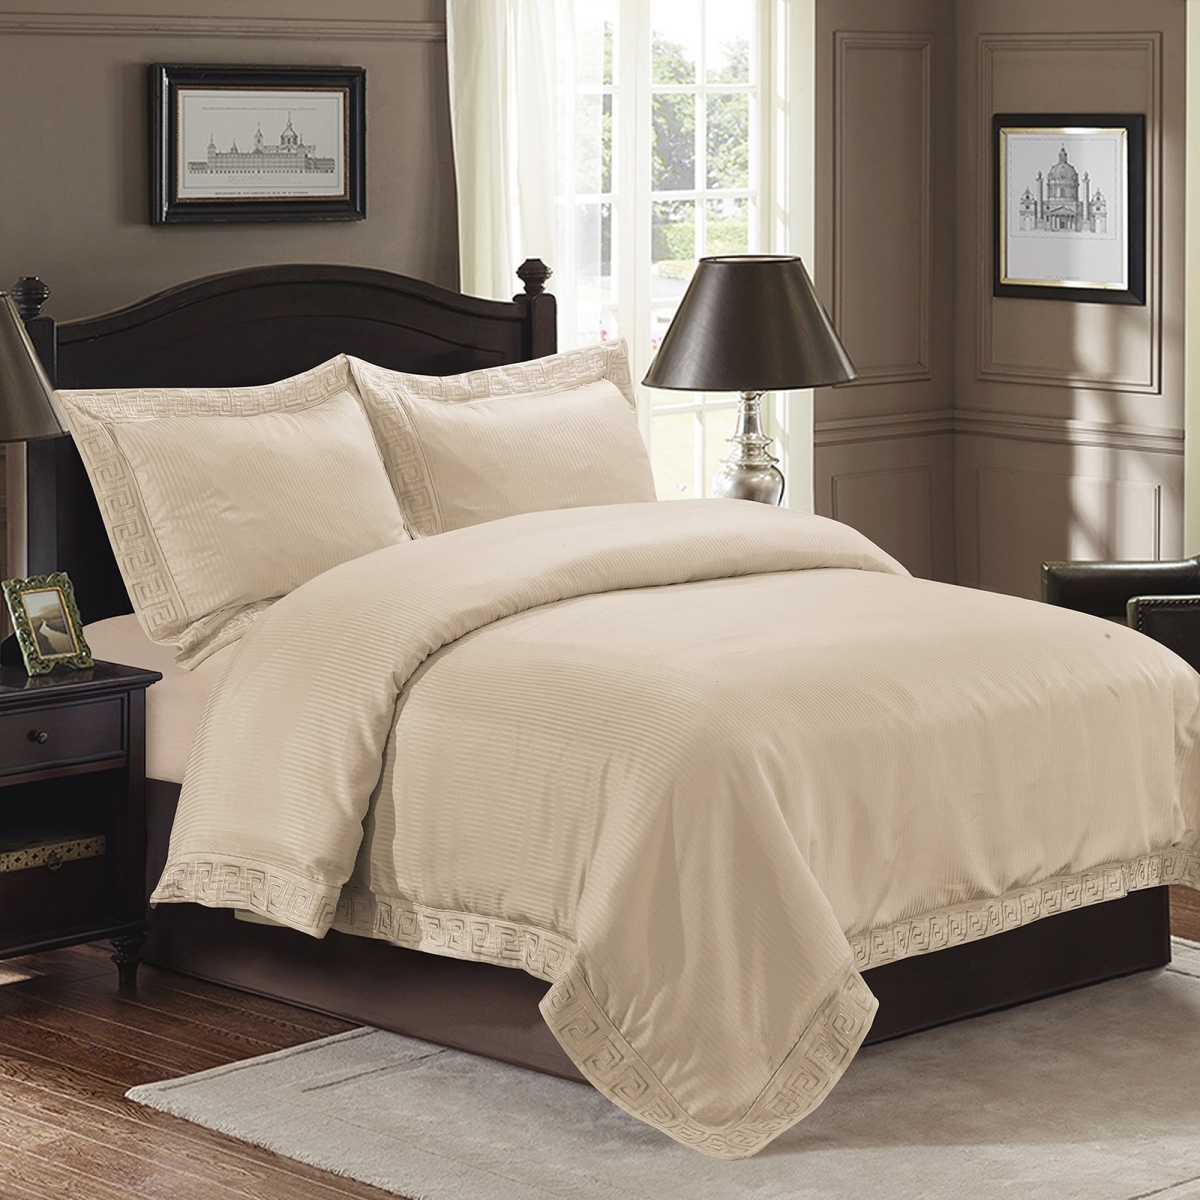 3 Piece Millano Embroidered Greek Key Duvet Set, Taupe - Queen Size